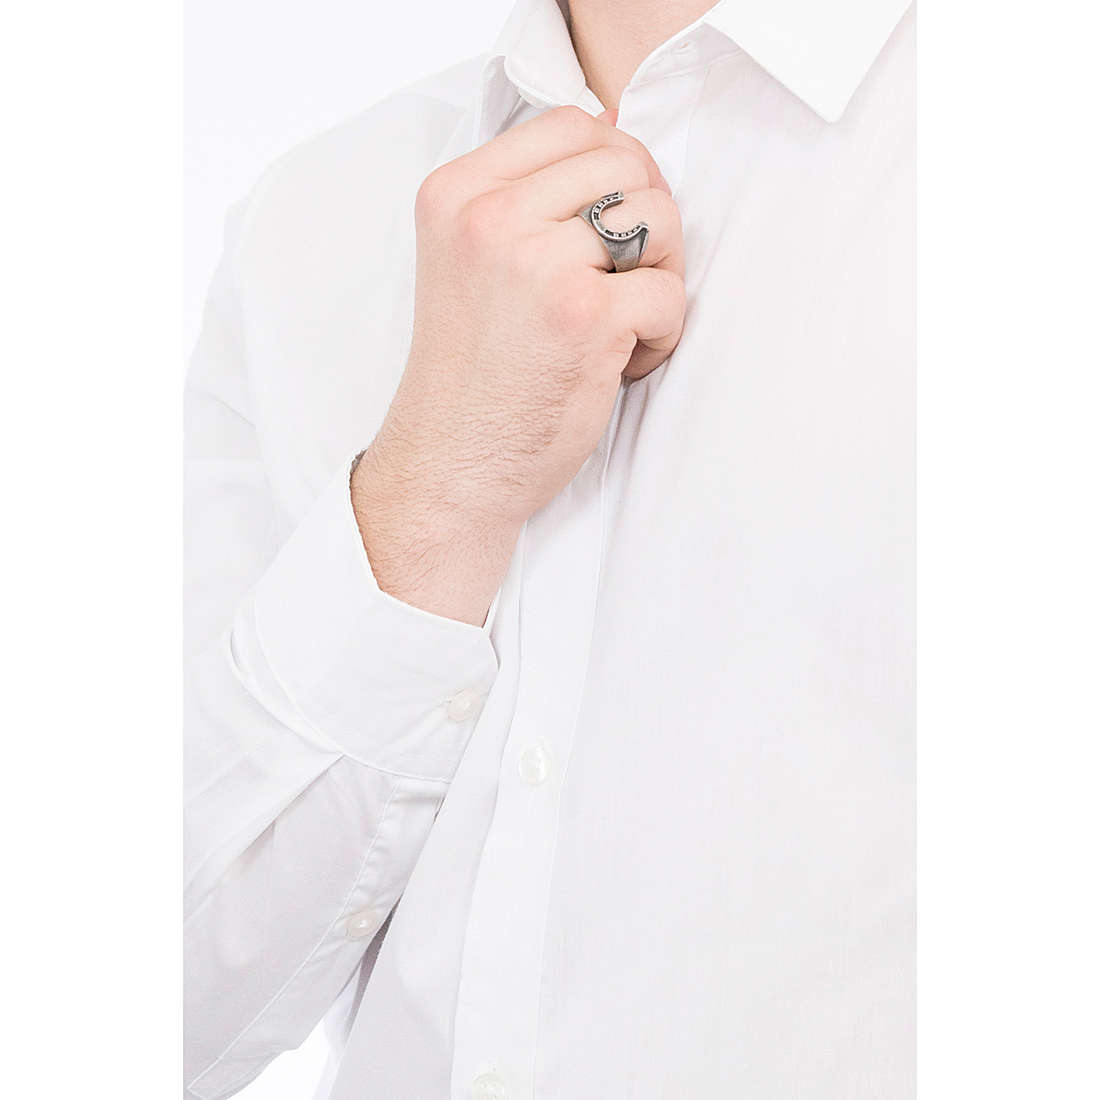 Fossil rings man JF03182797510 wearing